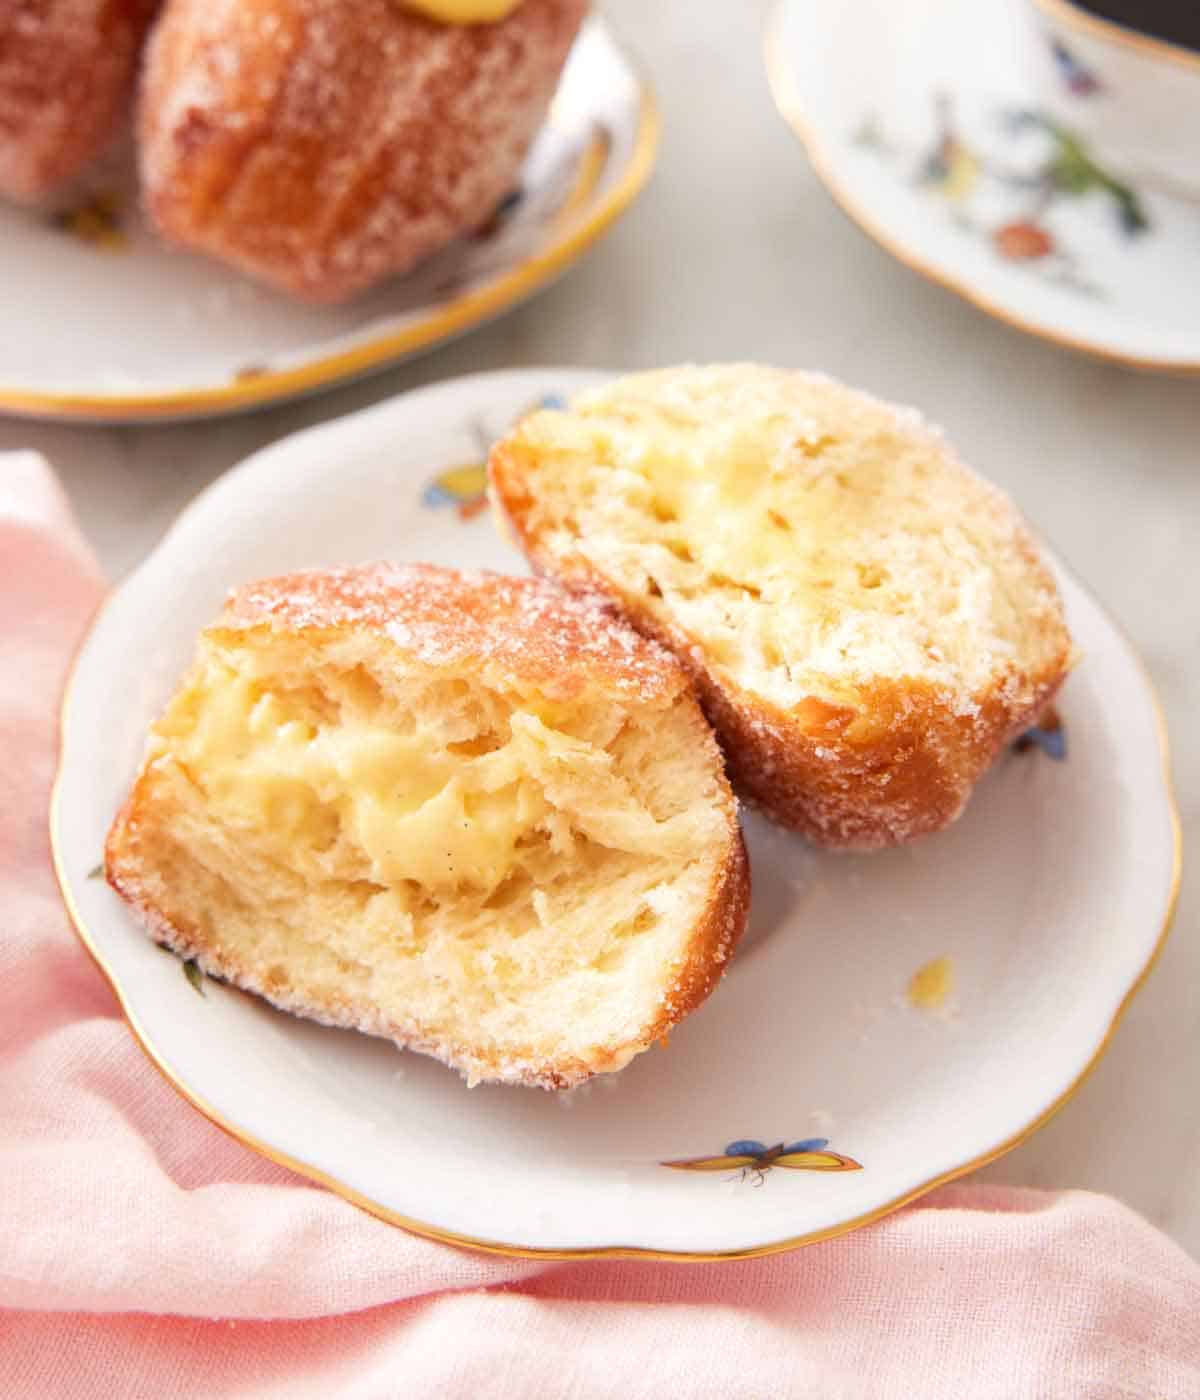 A plate with a bomboloni cut in half, showing the pastry cream in the middle.